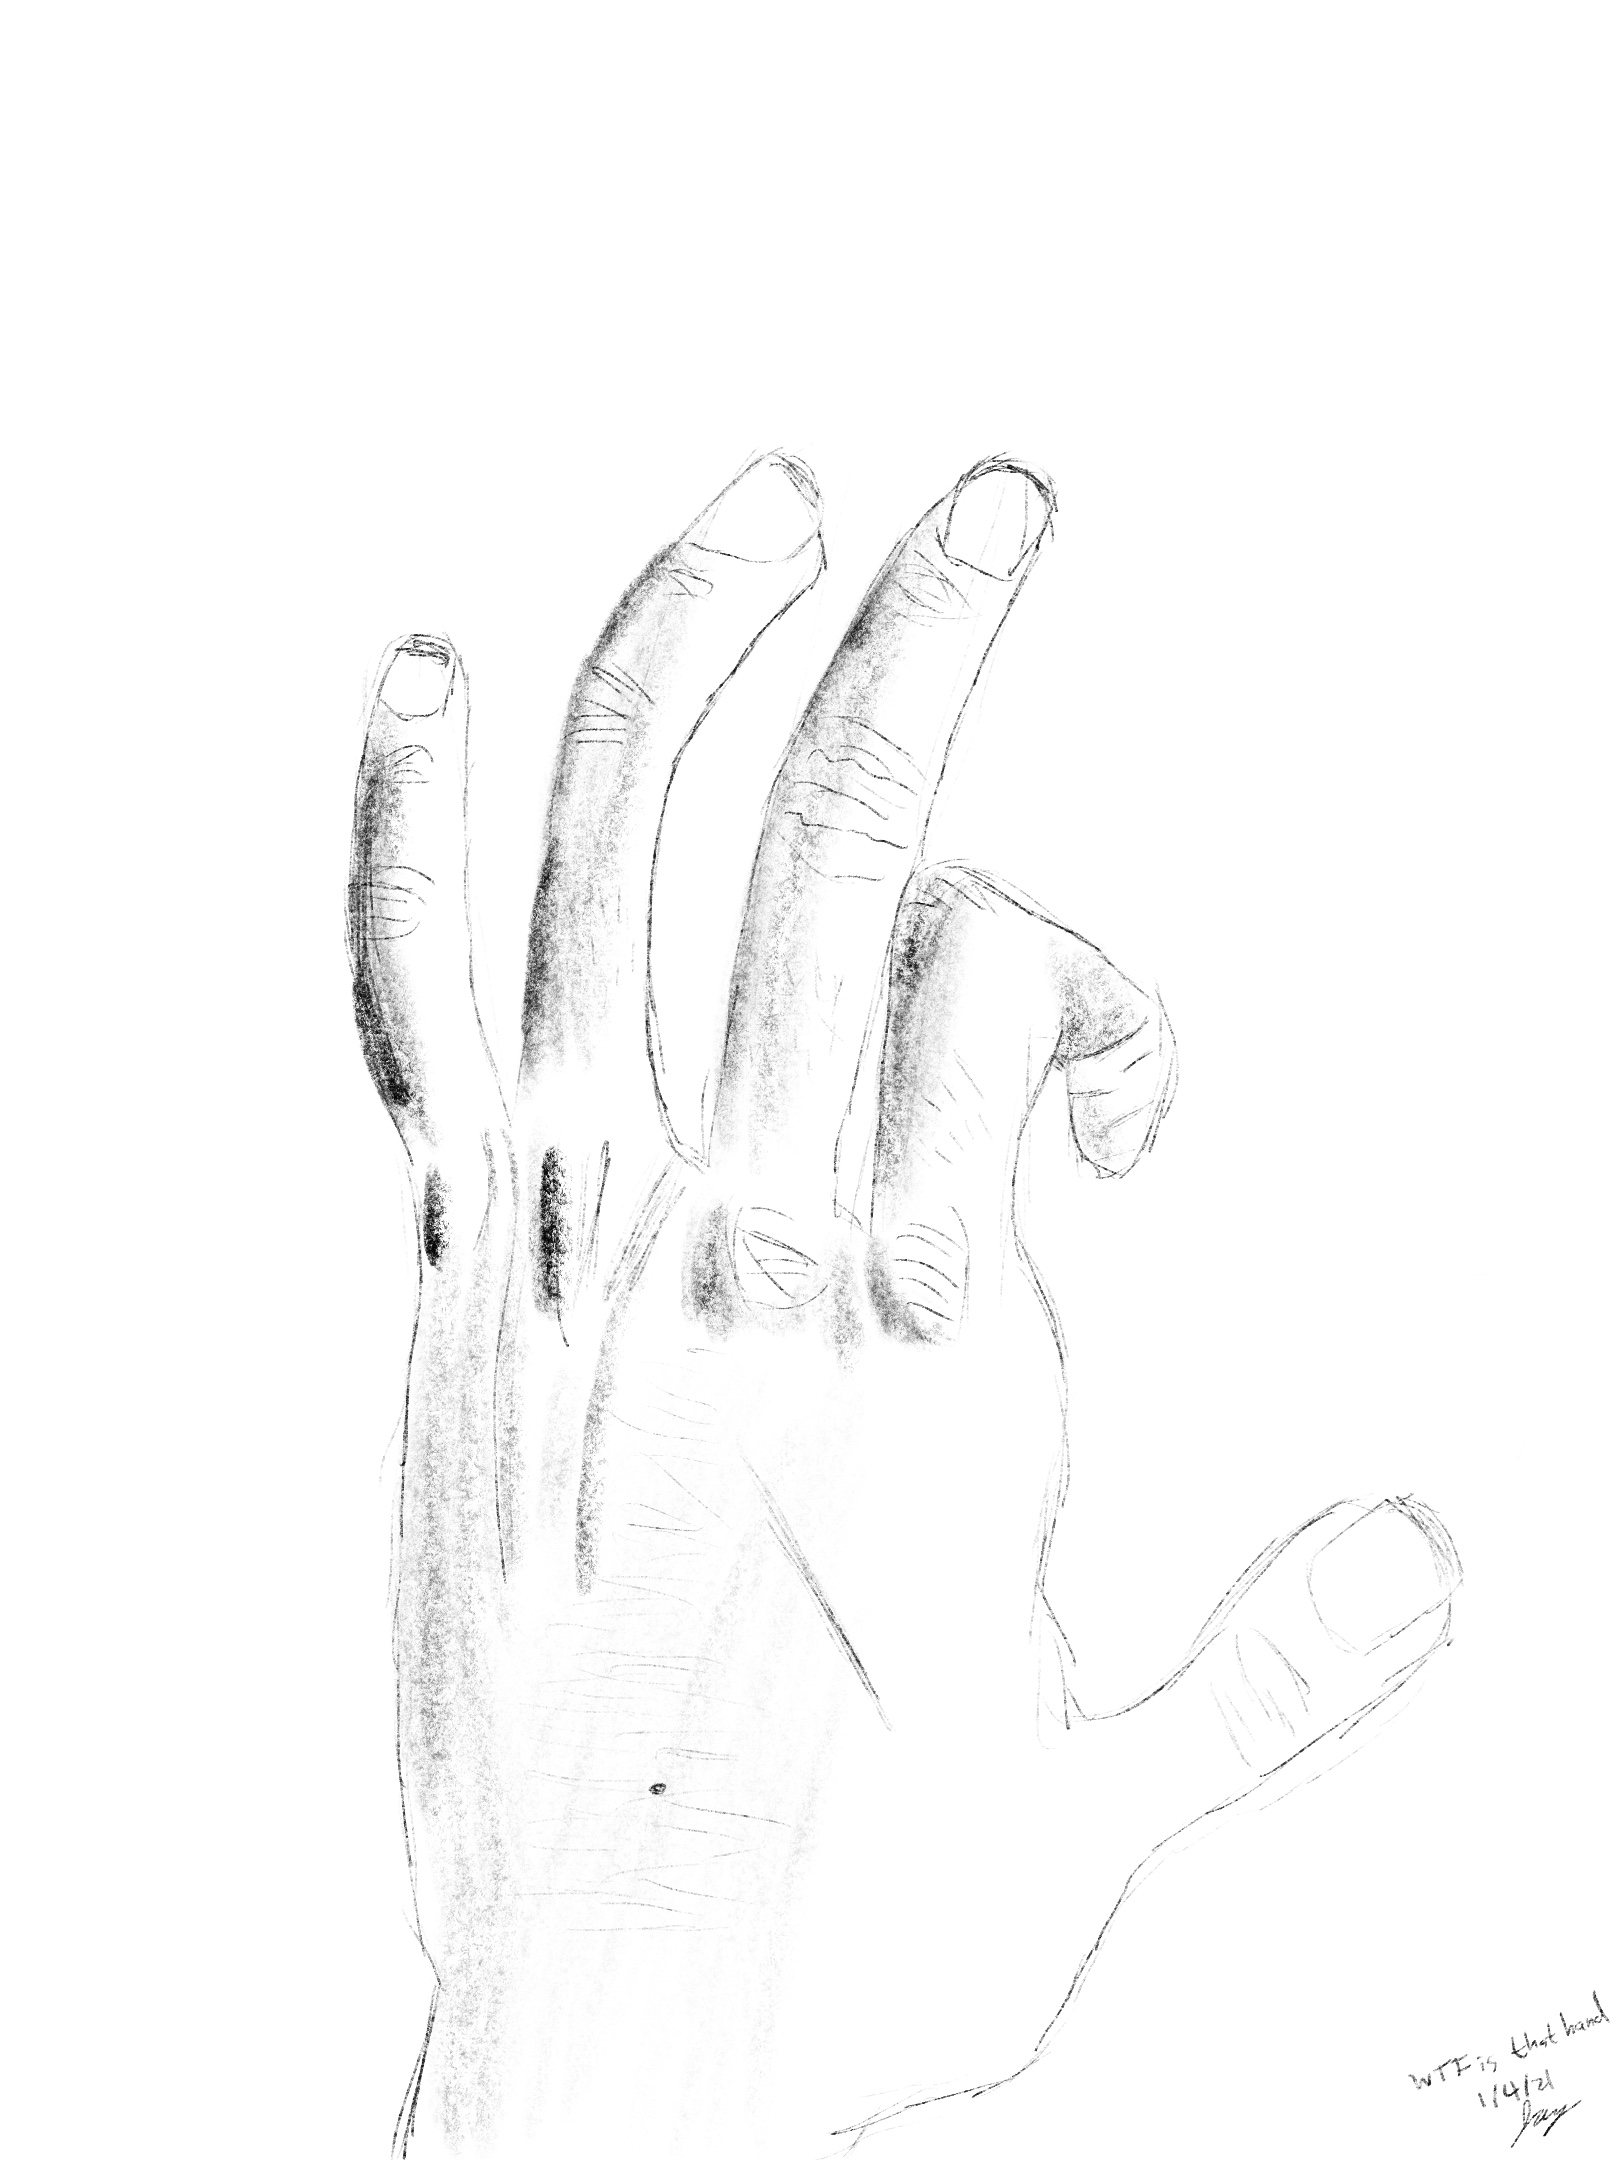 A drawing of the back of a left hand, resting on top of a surface. The fingers don't have the correct shape or proportion, and the shading looks odd.